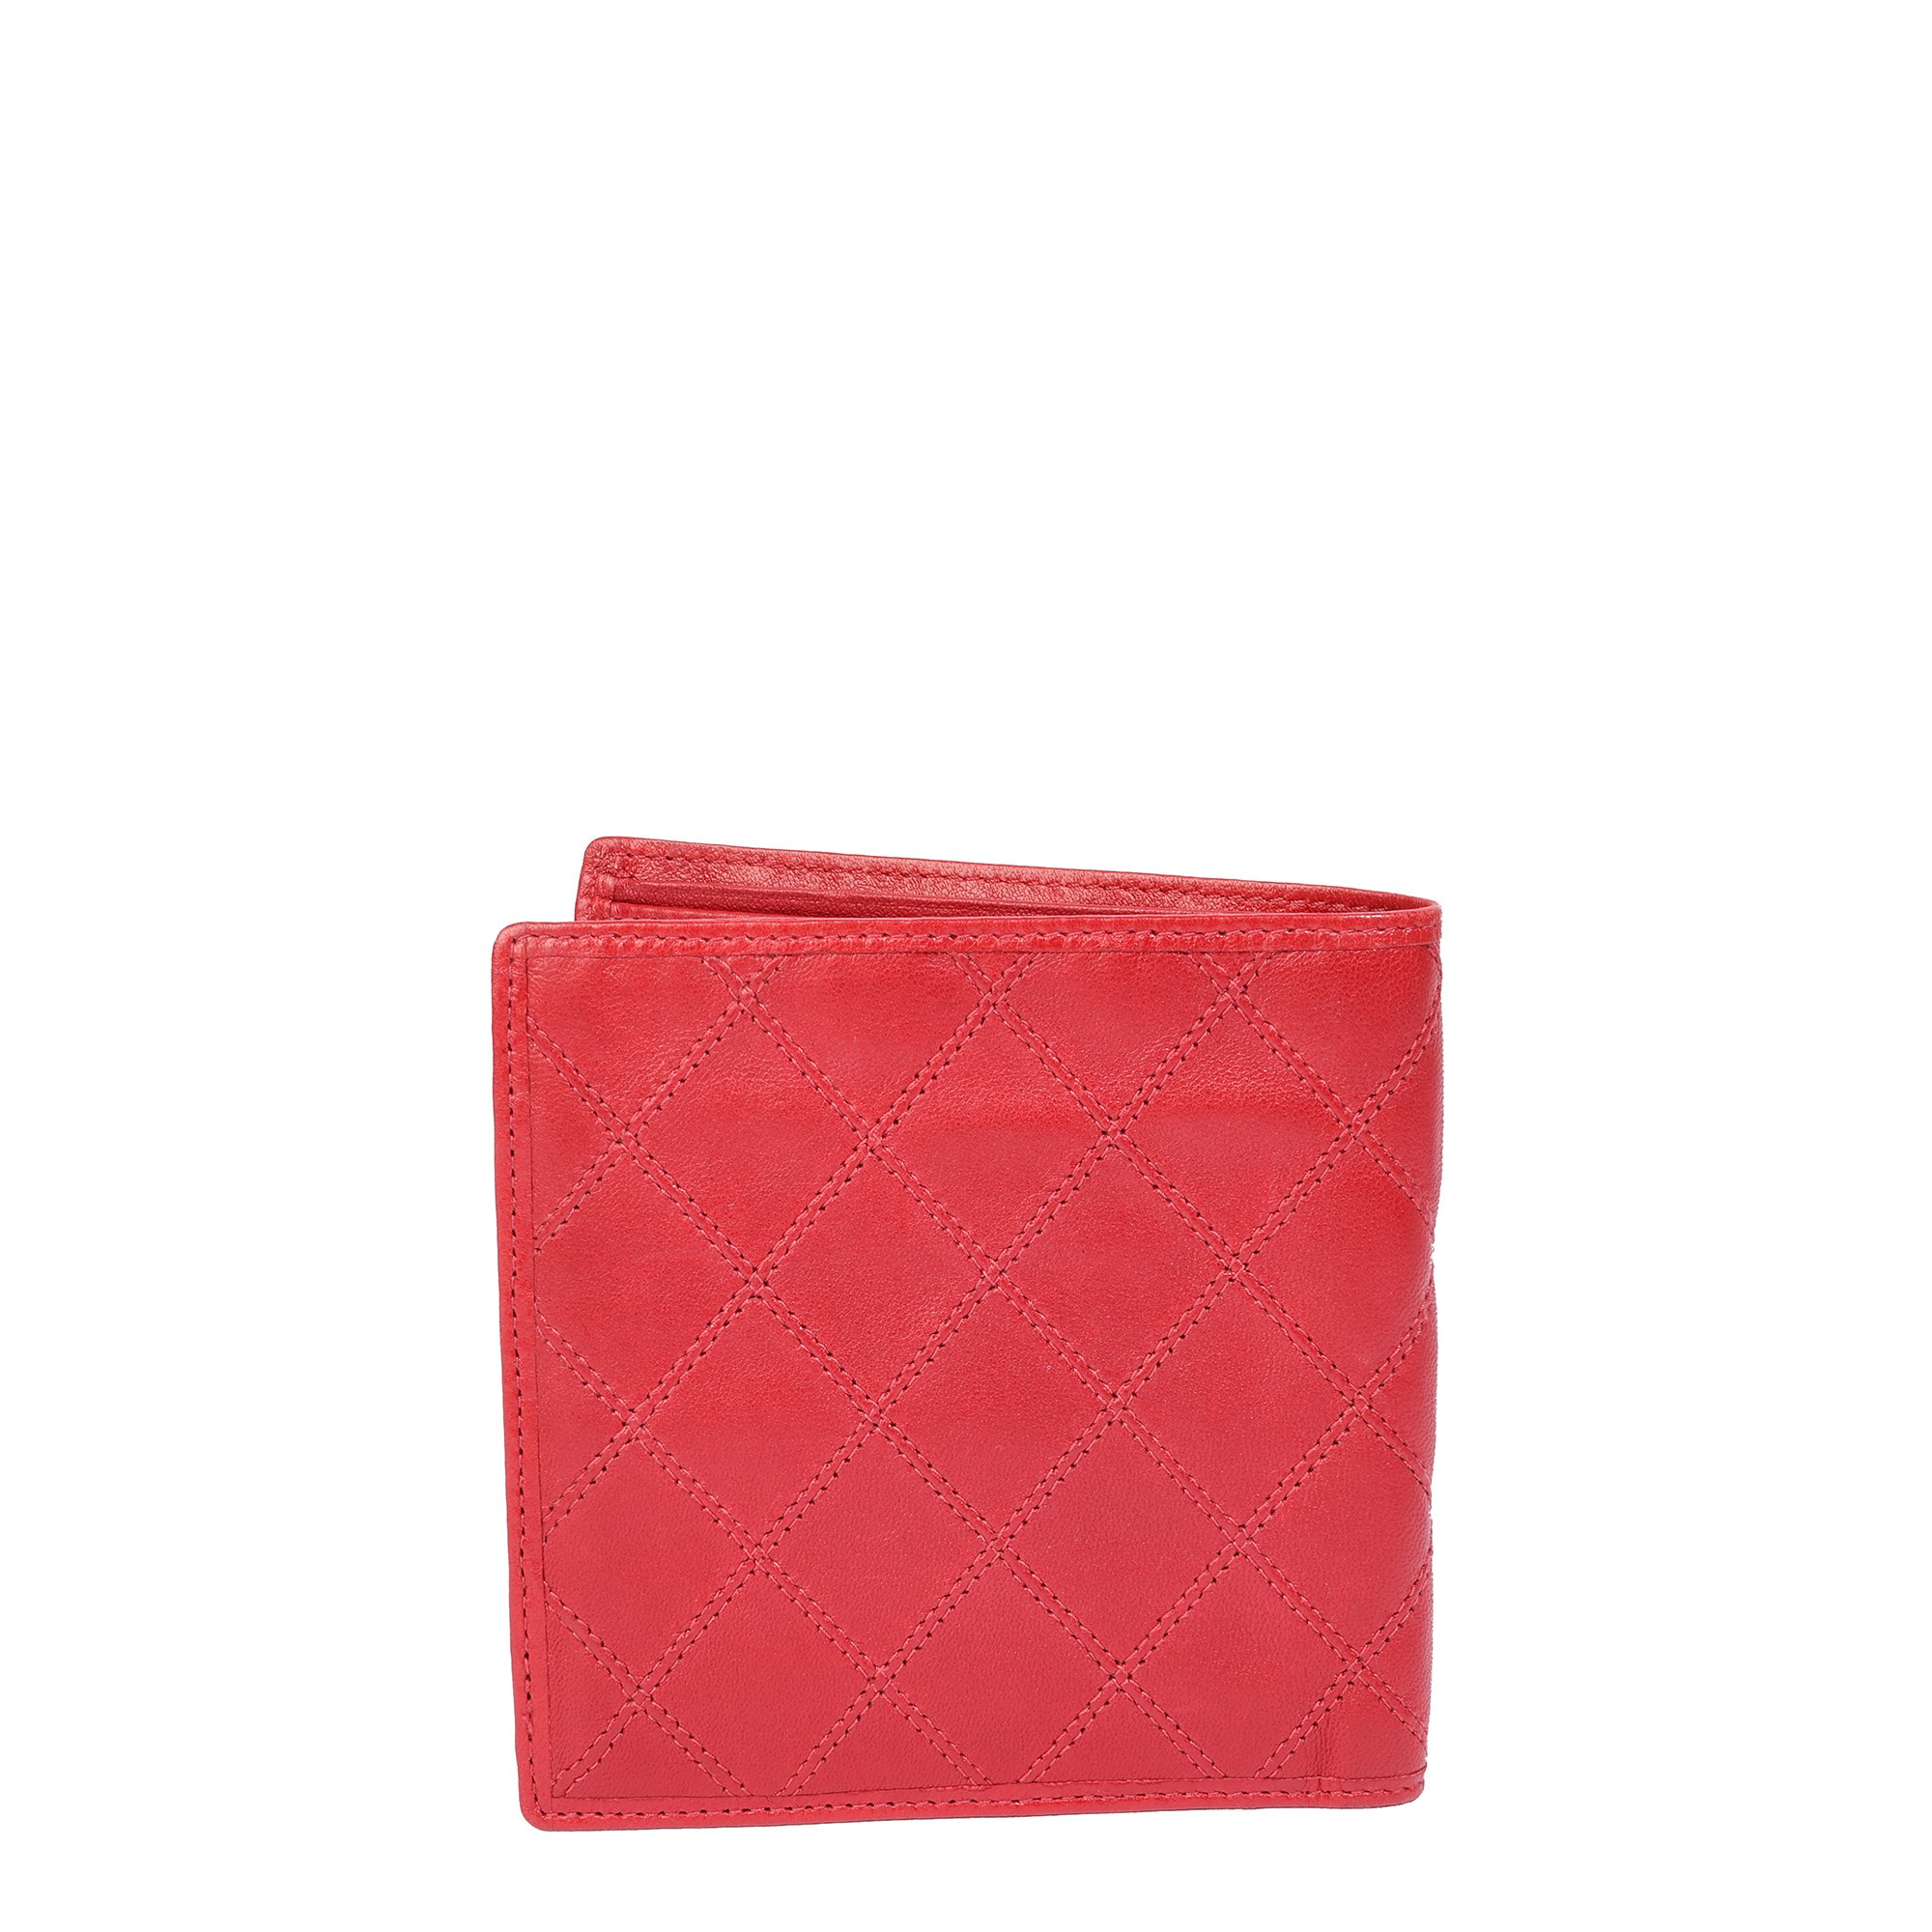 Chanel Red Quilted Lambskin Vintage Bi-Fold Wallet